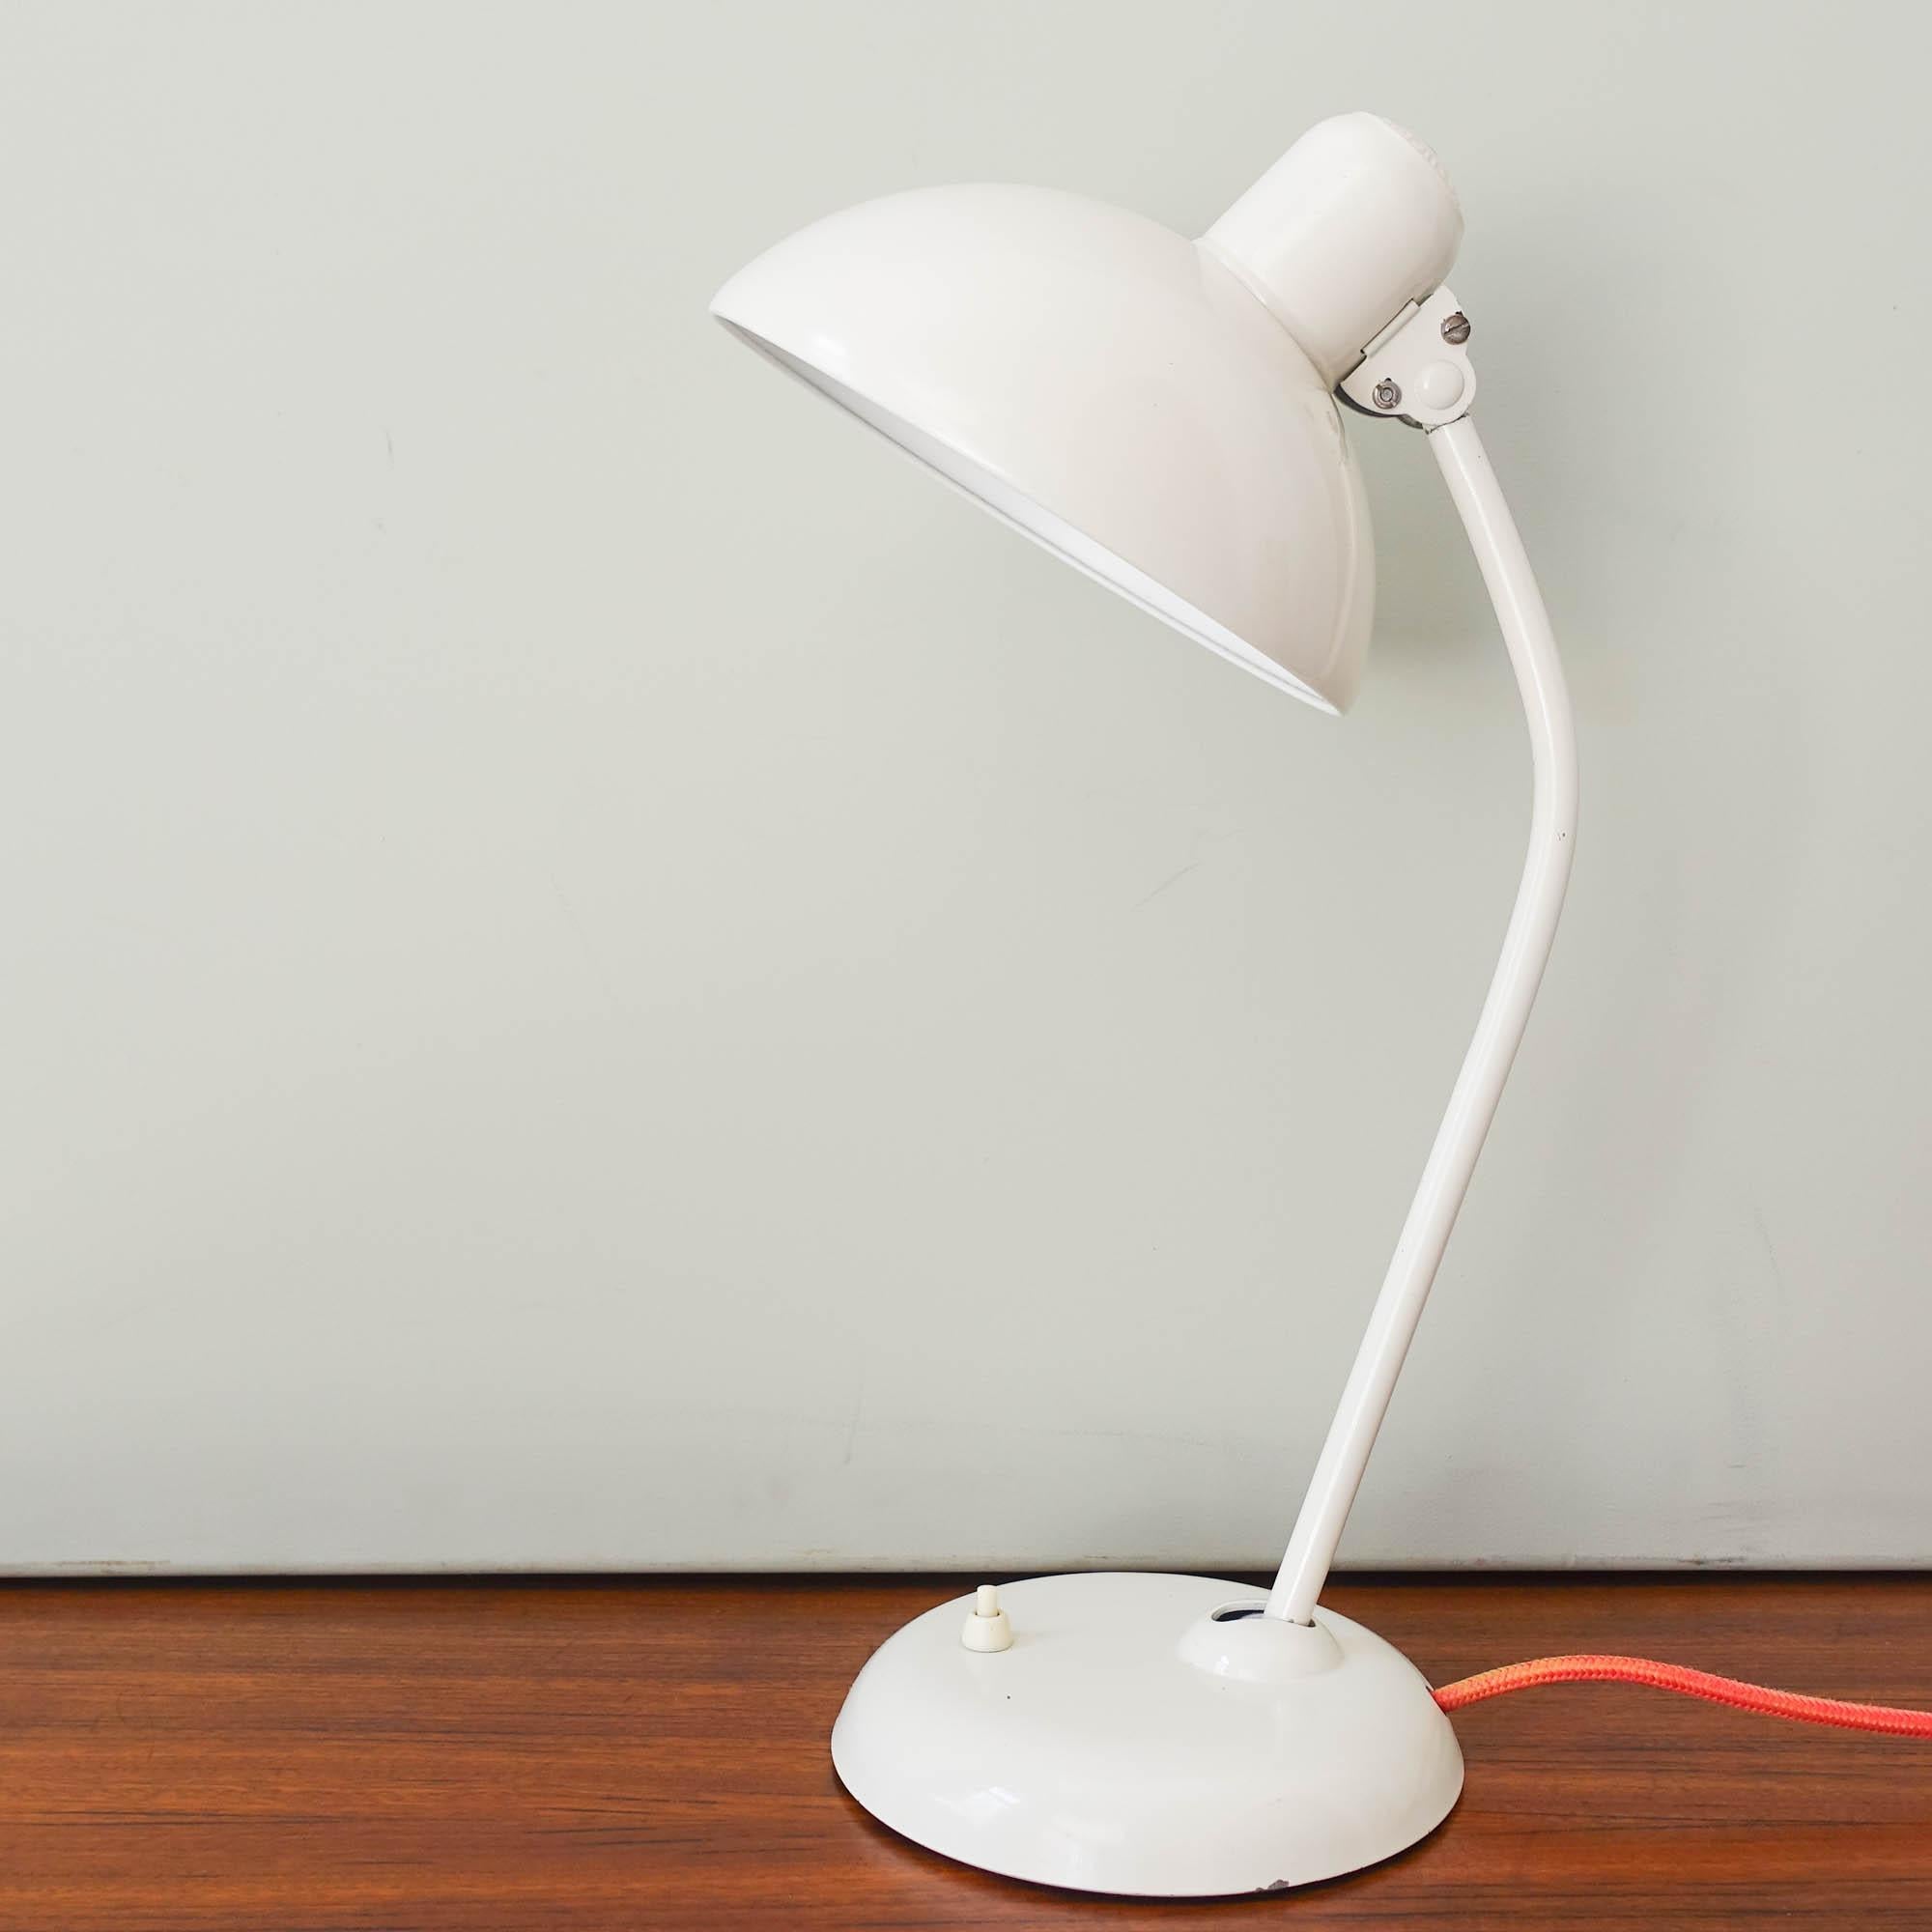 The 6556 model desk lamp was designed by Christian Dell and manufactured by Kaiser Idell, in Germany, during the 1930's. It features an adjustable white lacquered metal shade, with an adjustable white stem, attached to a cast iron base. With